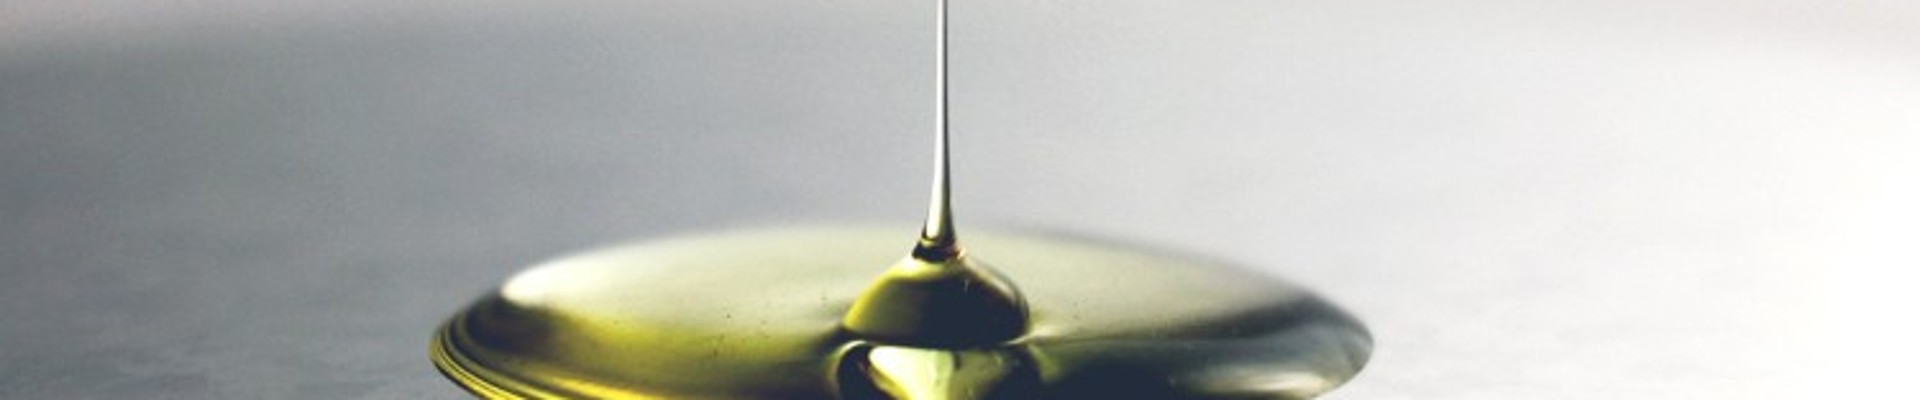 Gold-colored oil drop on black background 